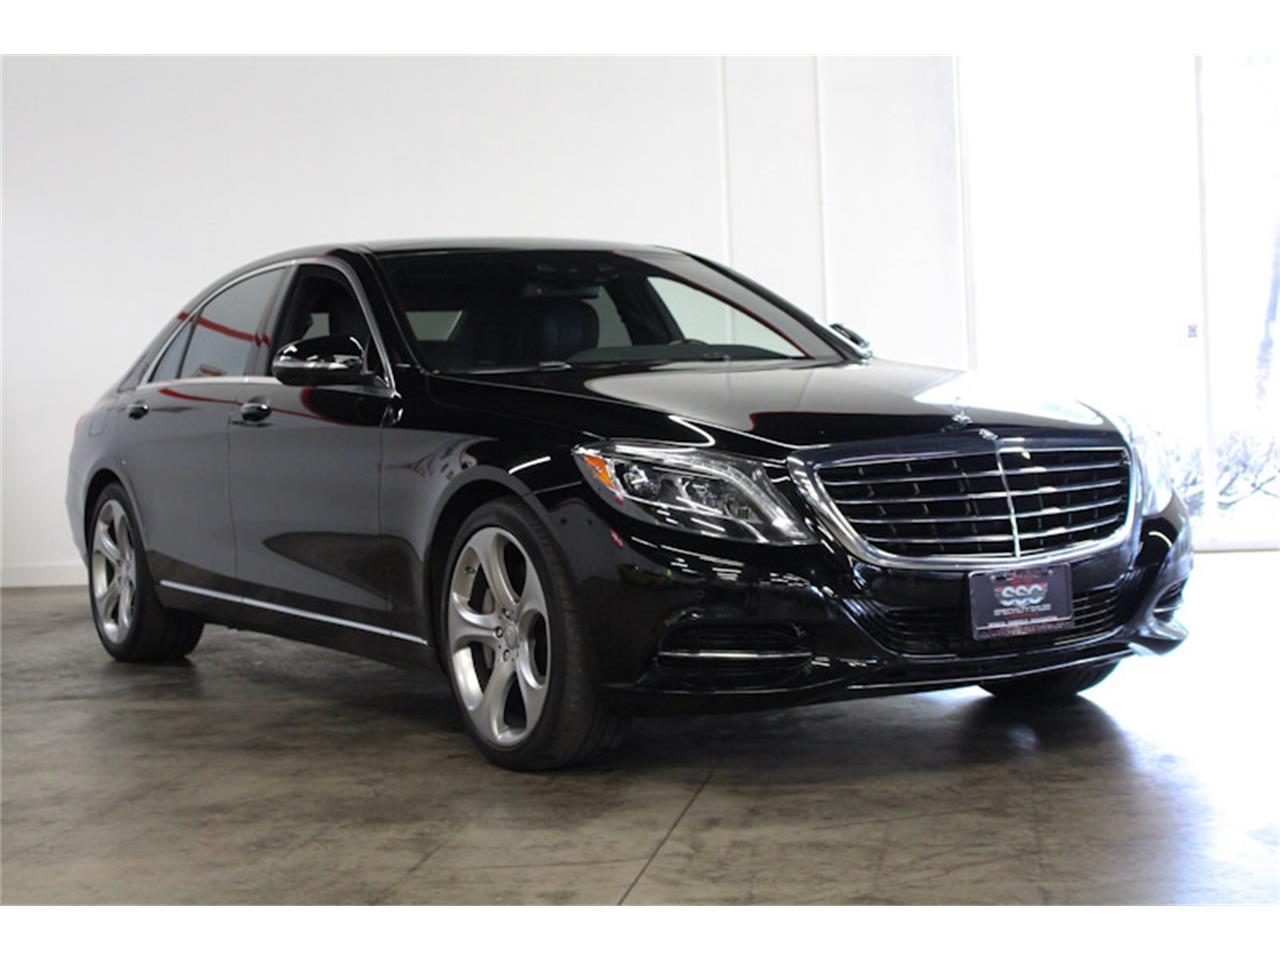 2015 Mercedes Benz S550 For Sale In Fairfield Ca Classiccarsbay Com